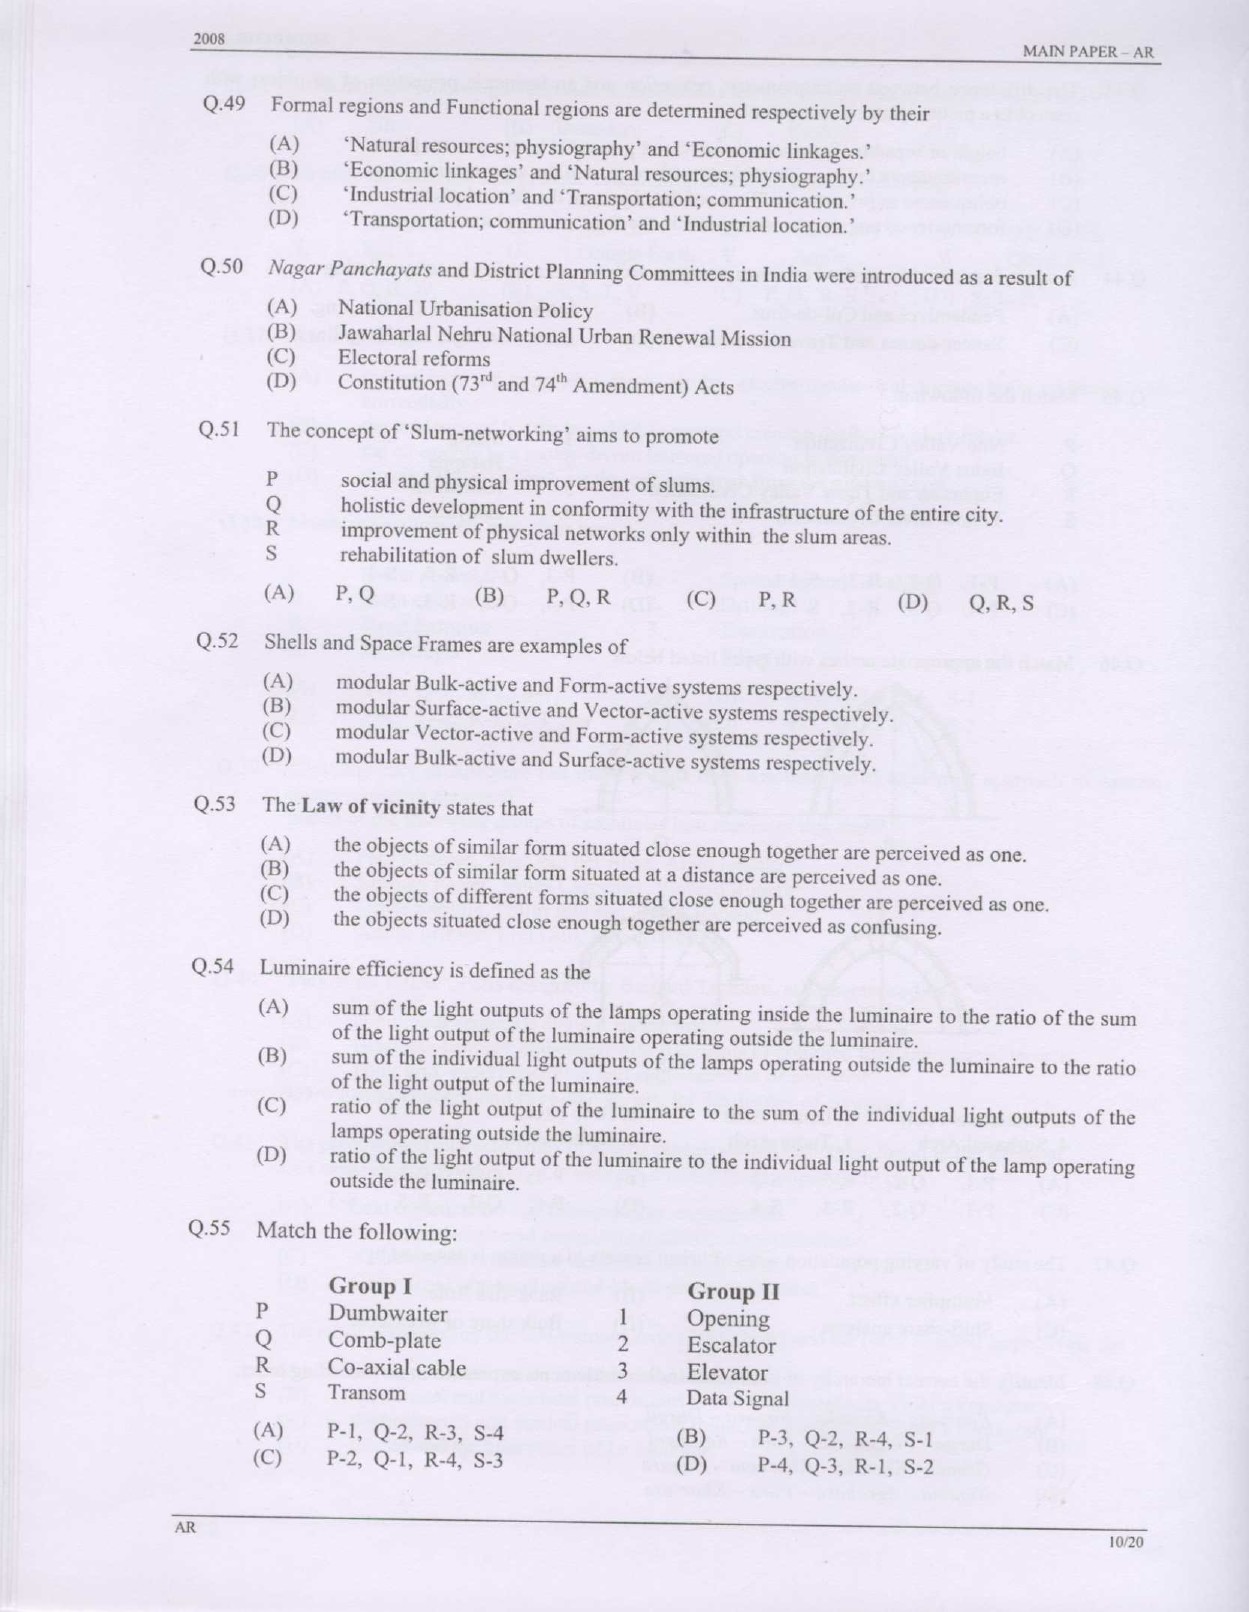 GATE Exam Question Paper 2008 Architecture and Planning 10